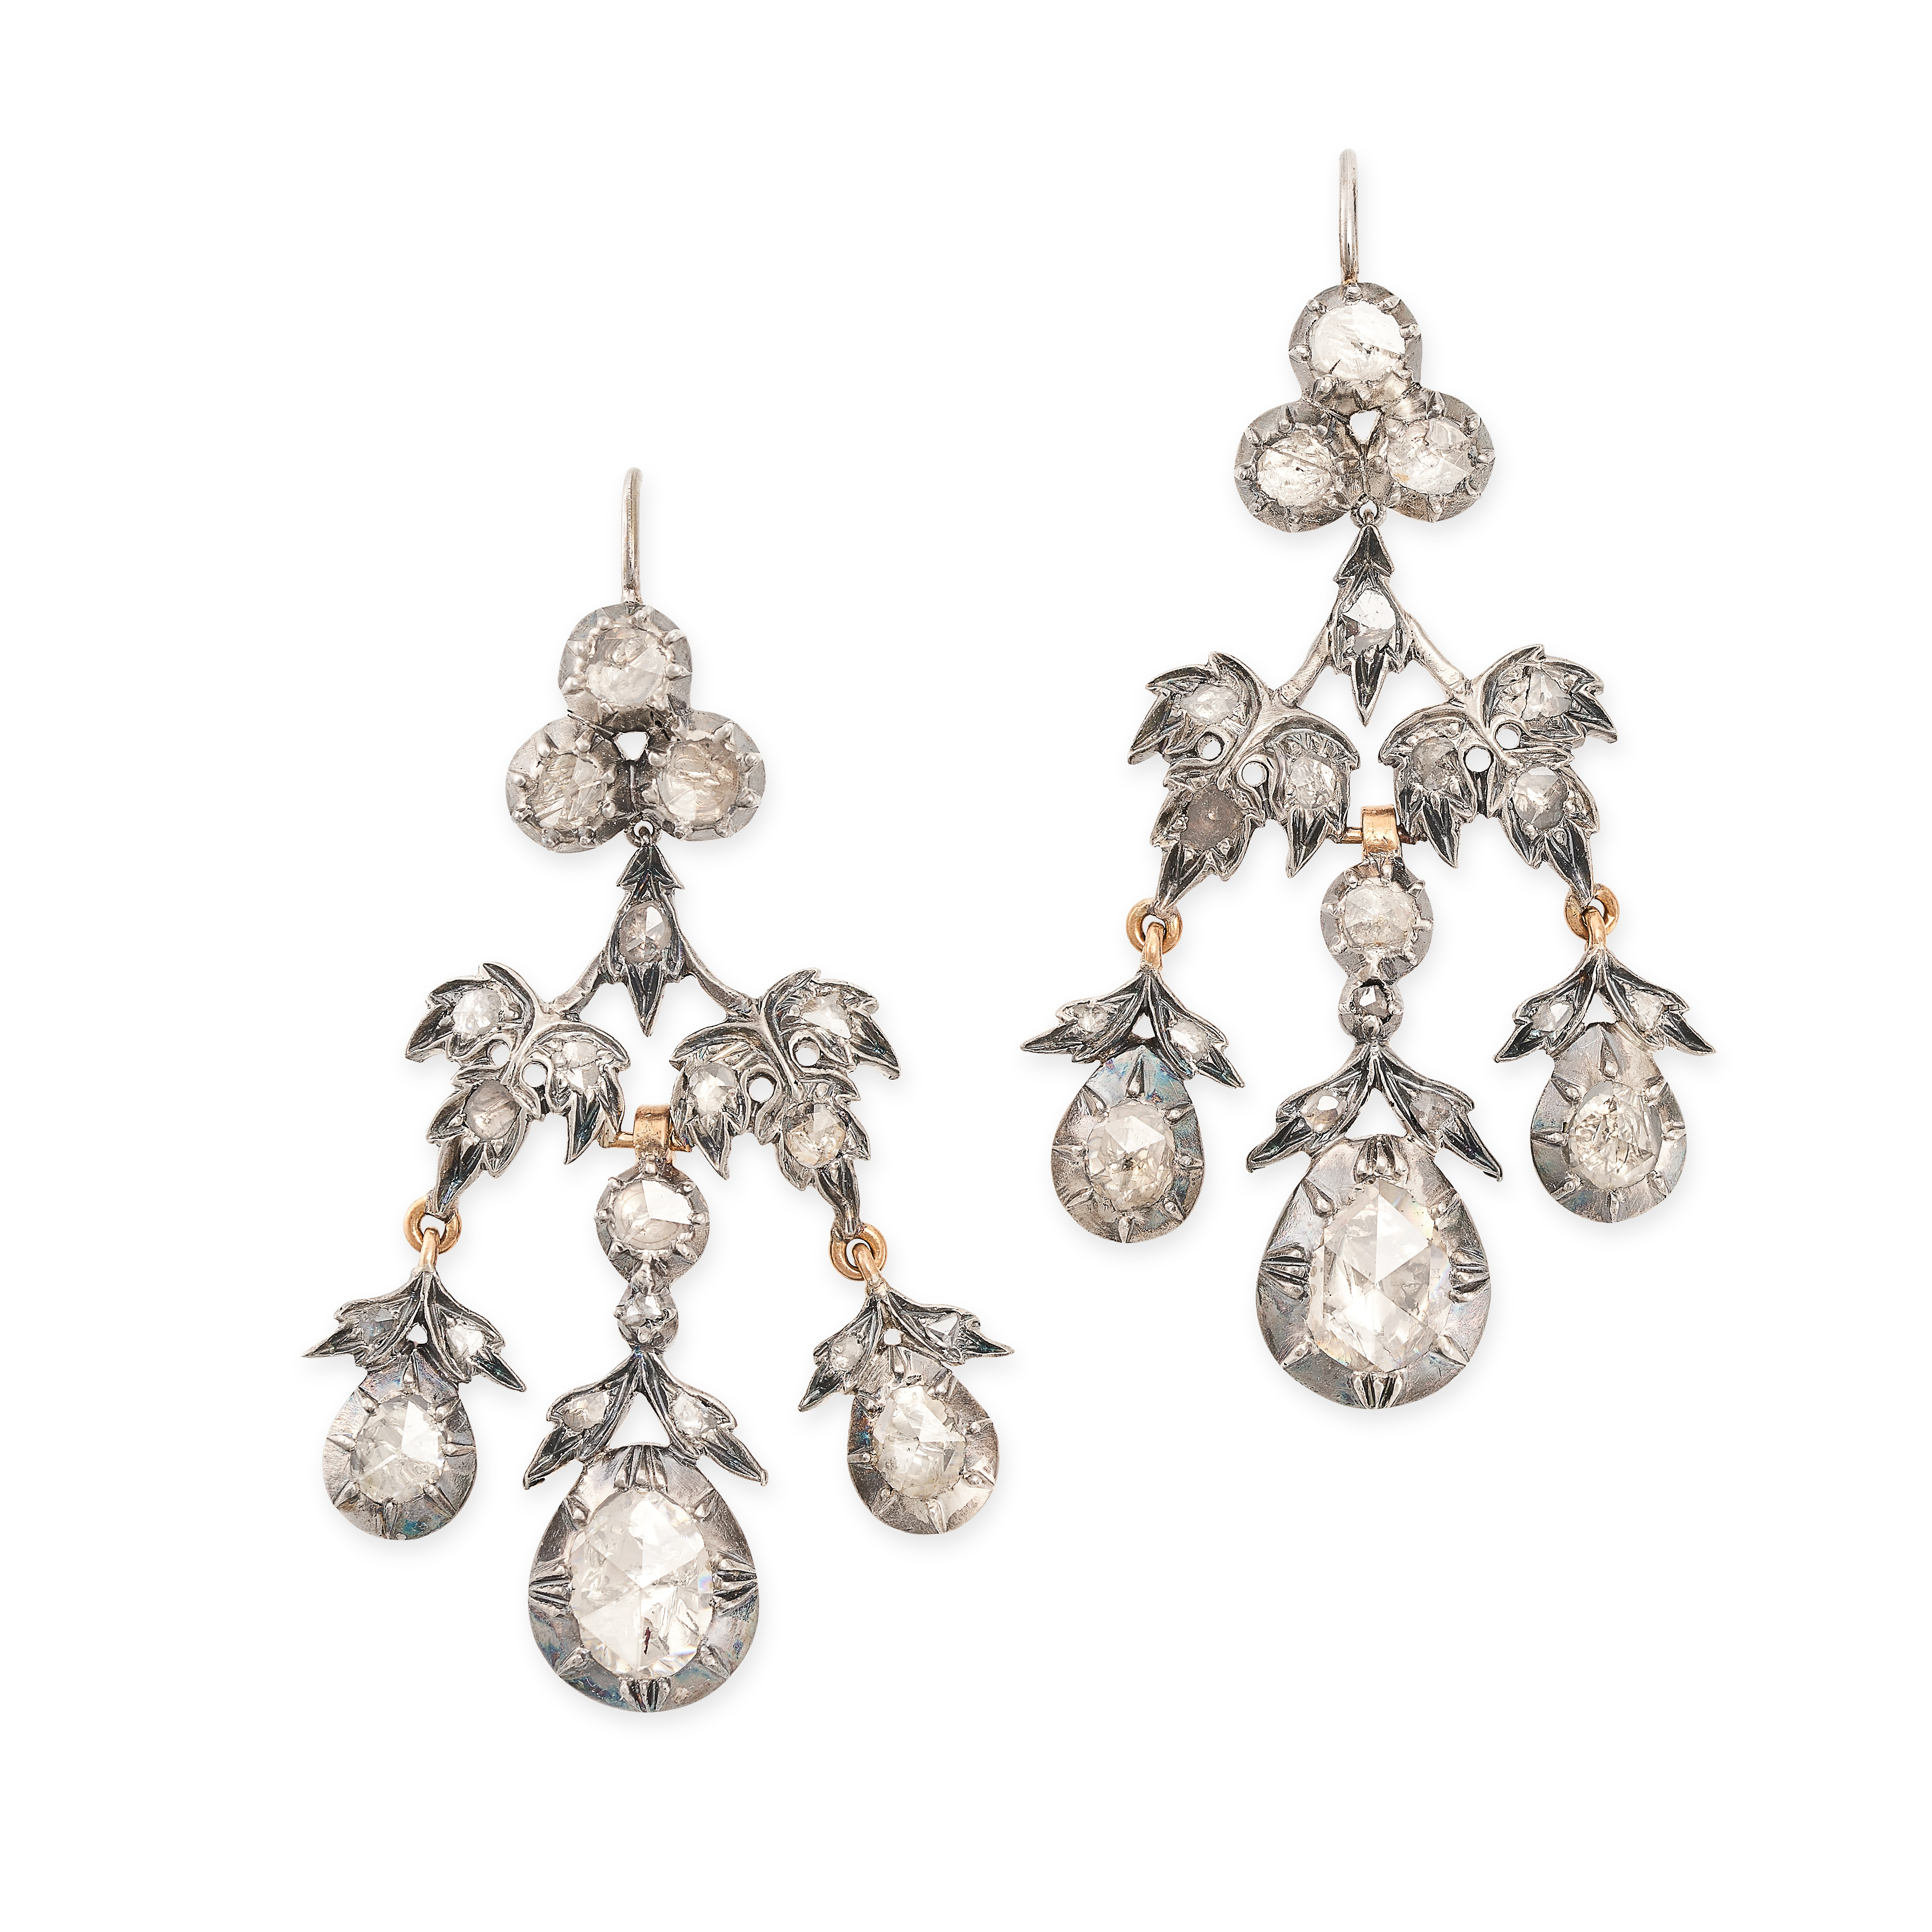 AN ANTIQUE DIAMOND BROOCH AND EARRINGS DEMI PARURE in yellow gold and silver, comprising a pair of - Image 2 of 2